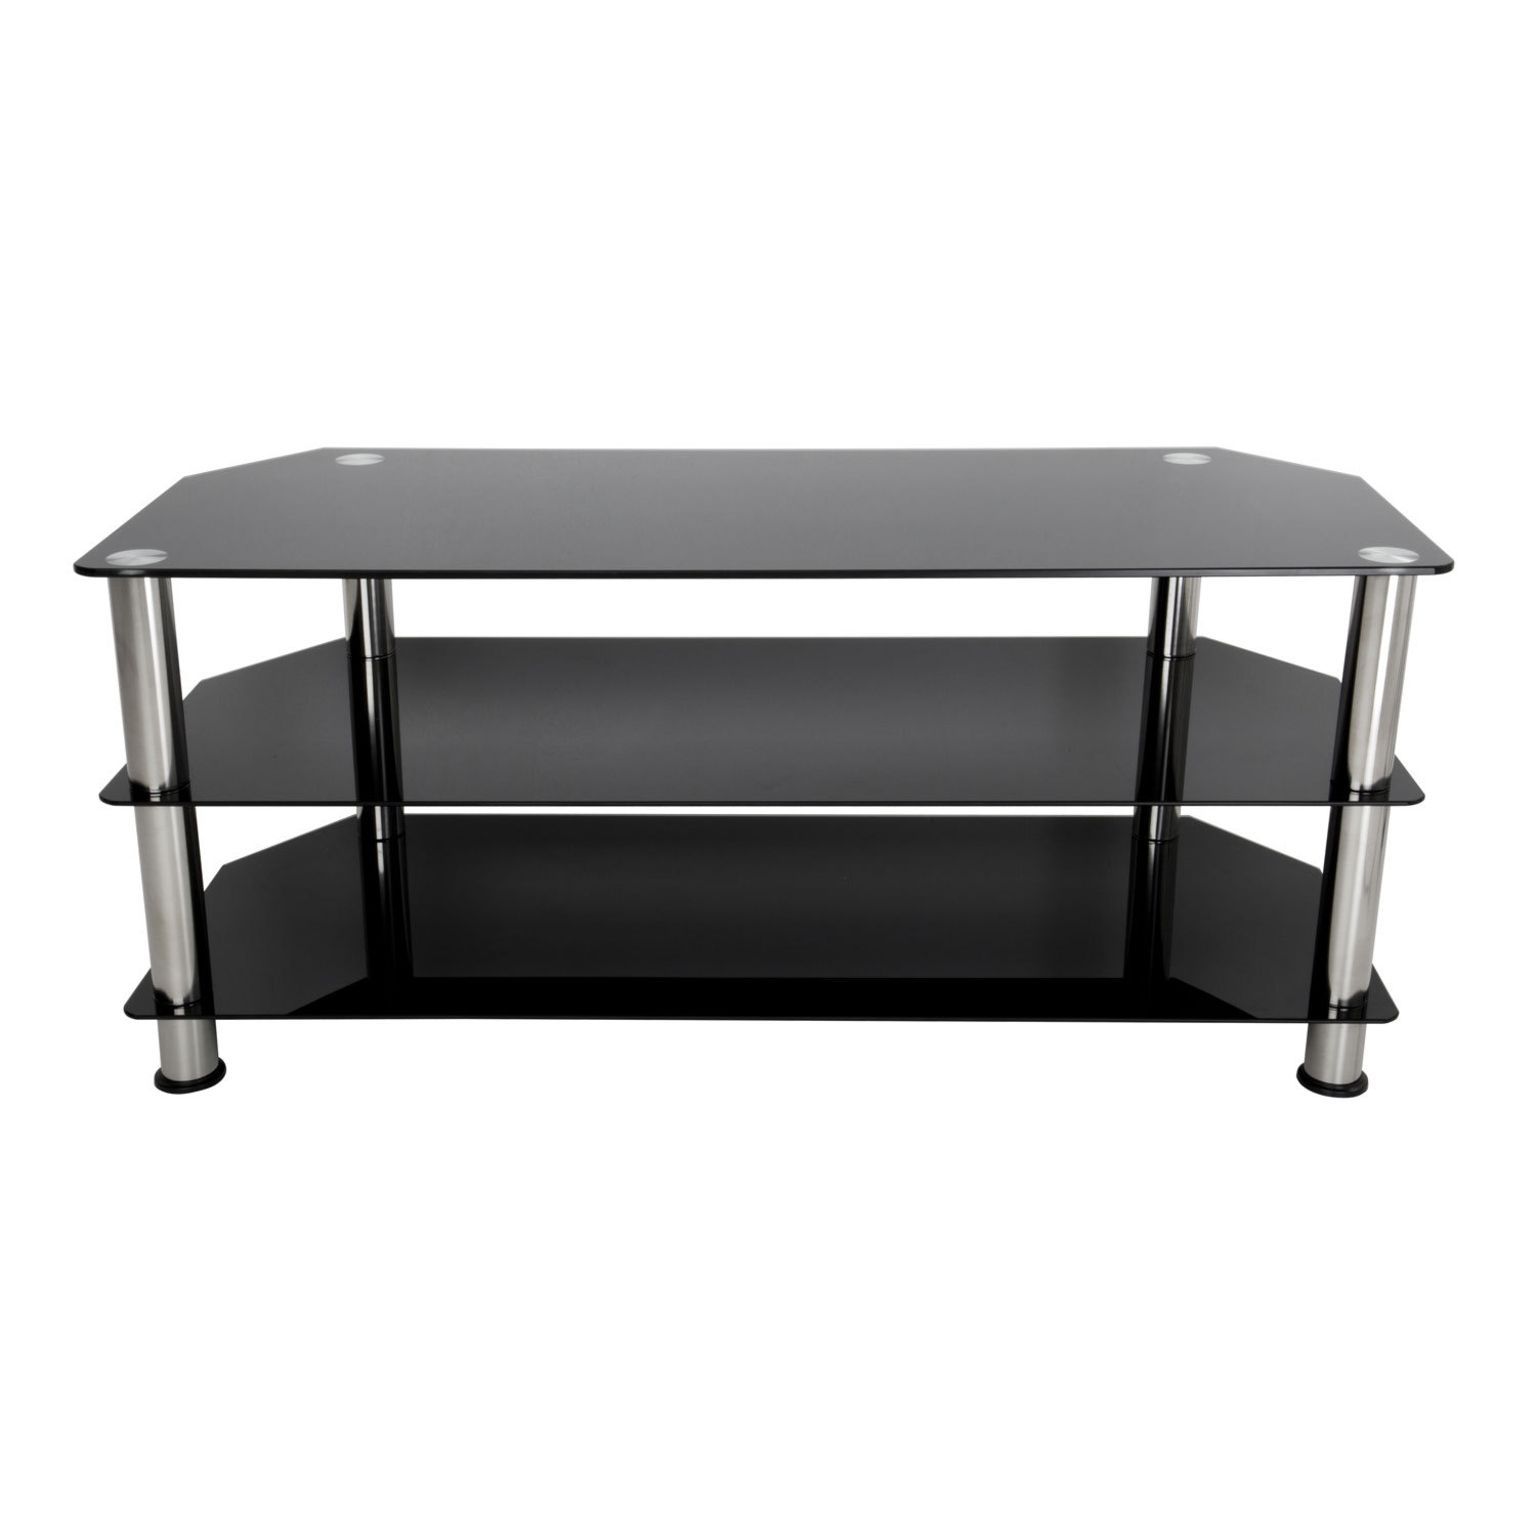 Https://en.shpock/i/w P0ut_e3qvdu2s8/ 2018 11 08t17:03:11+ In Kilian Black 49 Inch Tv Stands (Photo 9 of 30)